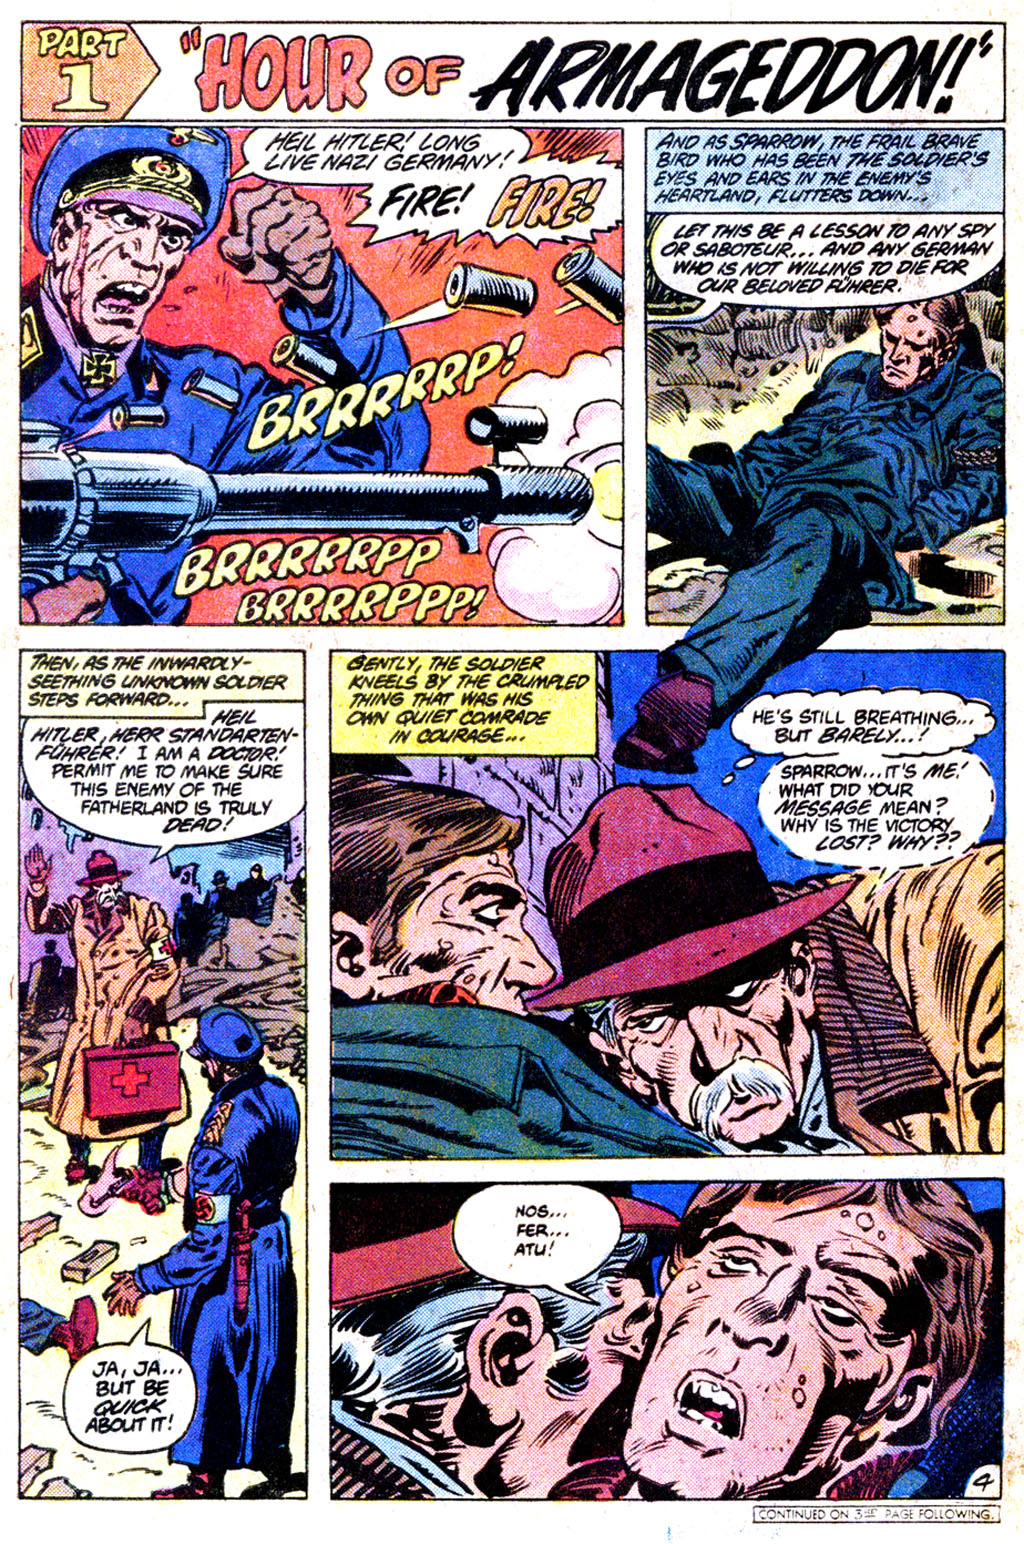 Unknown Soldier (1977) Issue #268 #64 - English 4